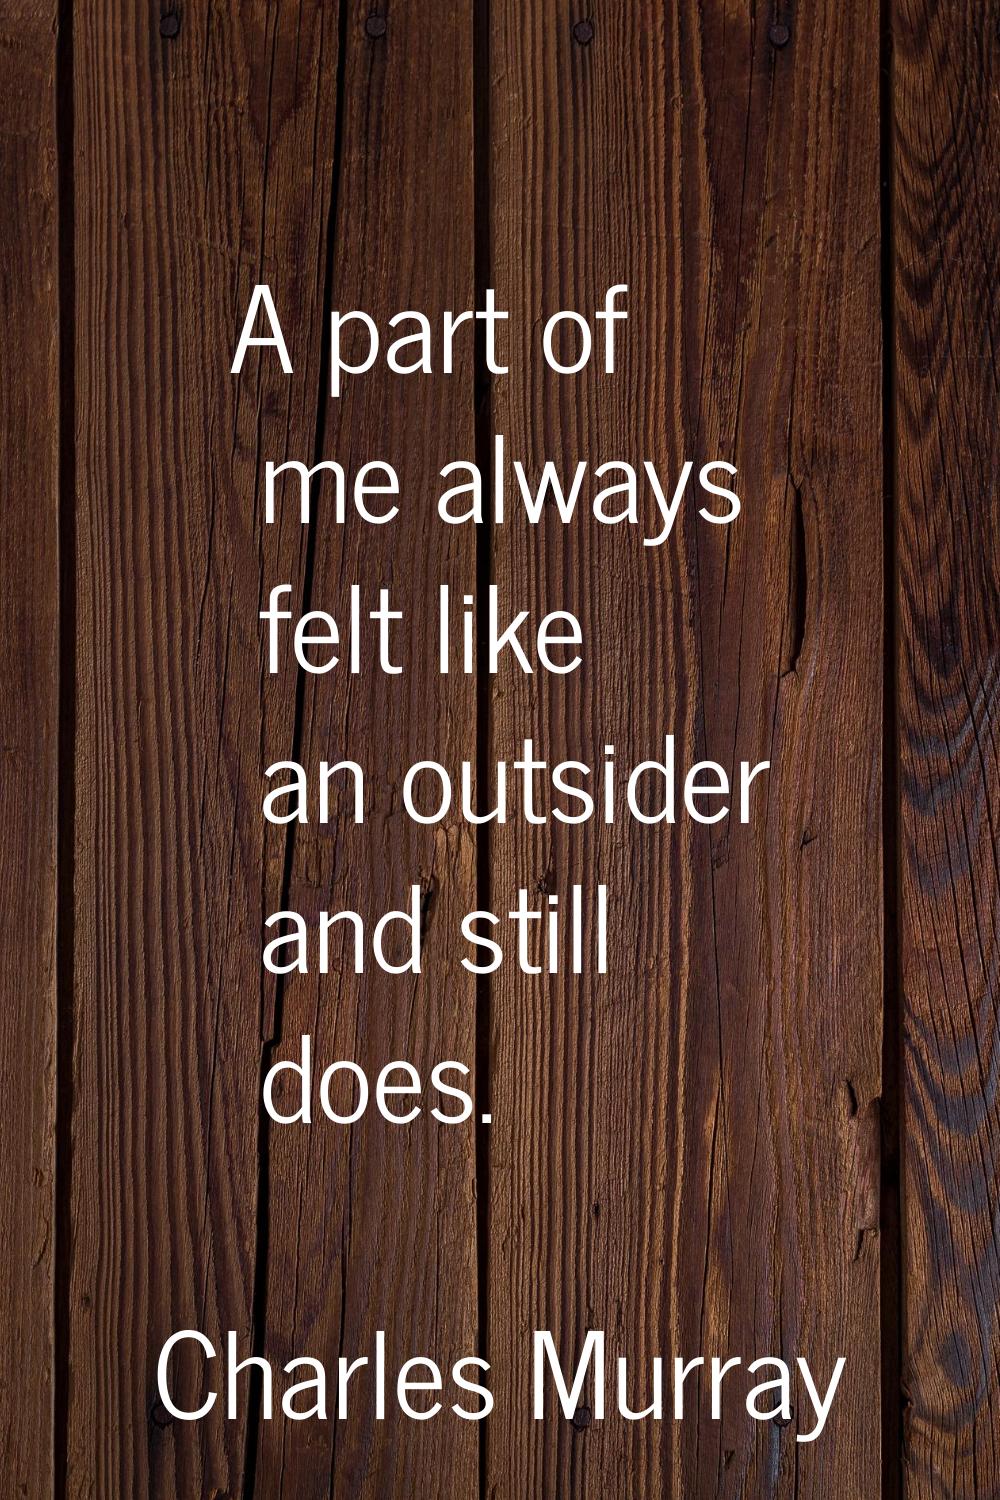 A part of me always felt like an outsider and still does.